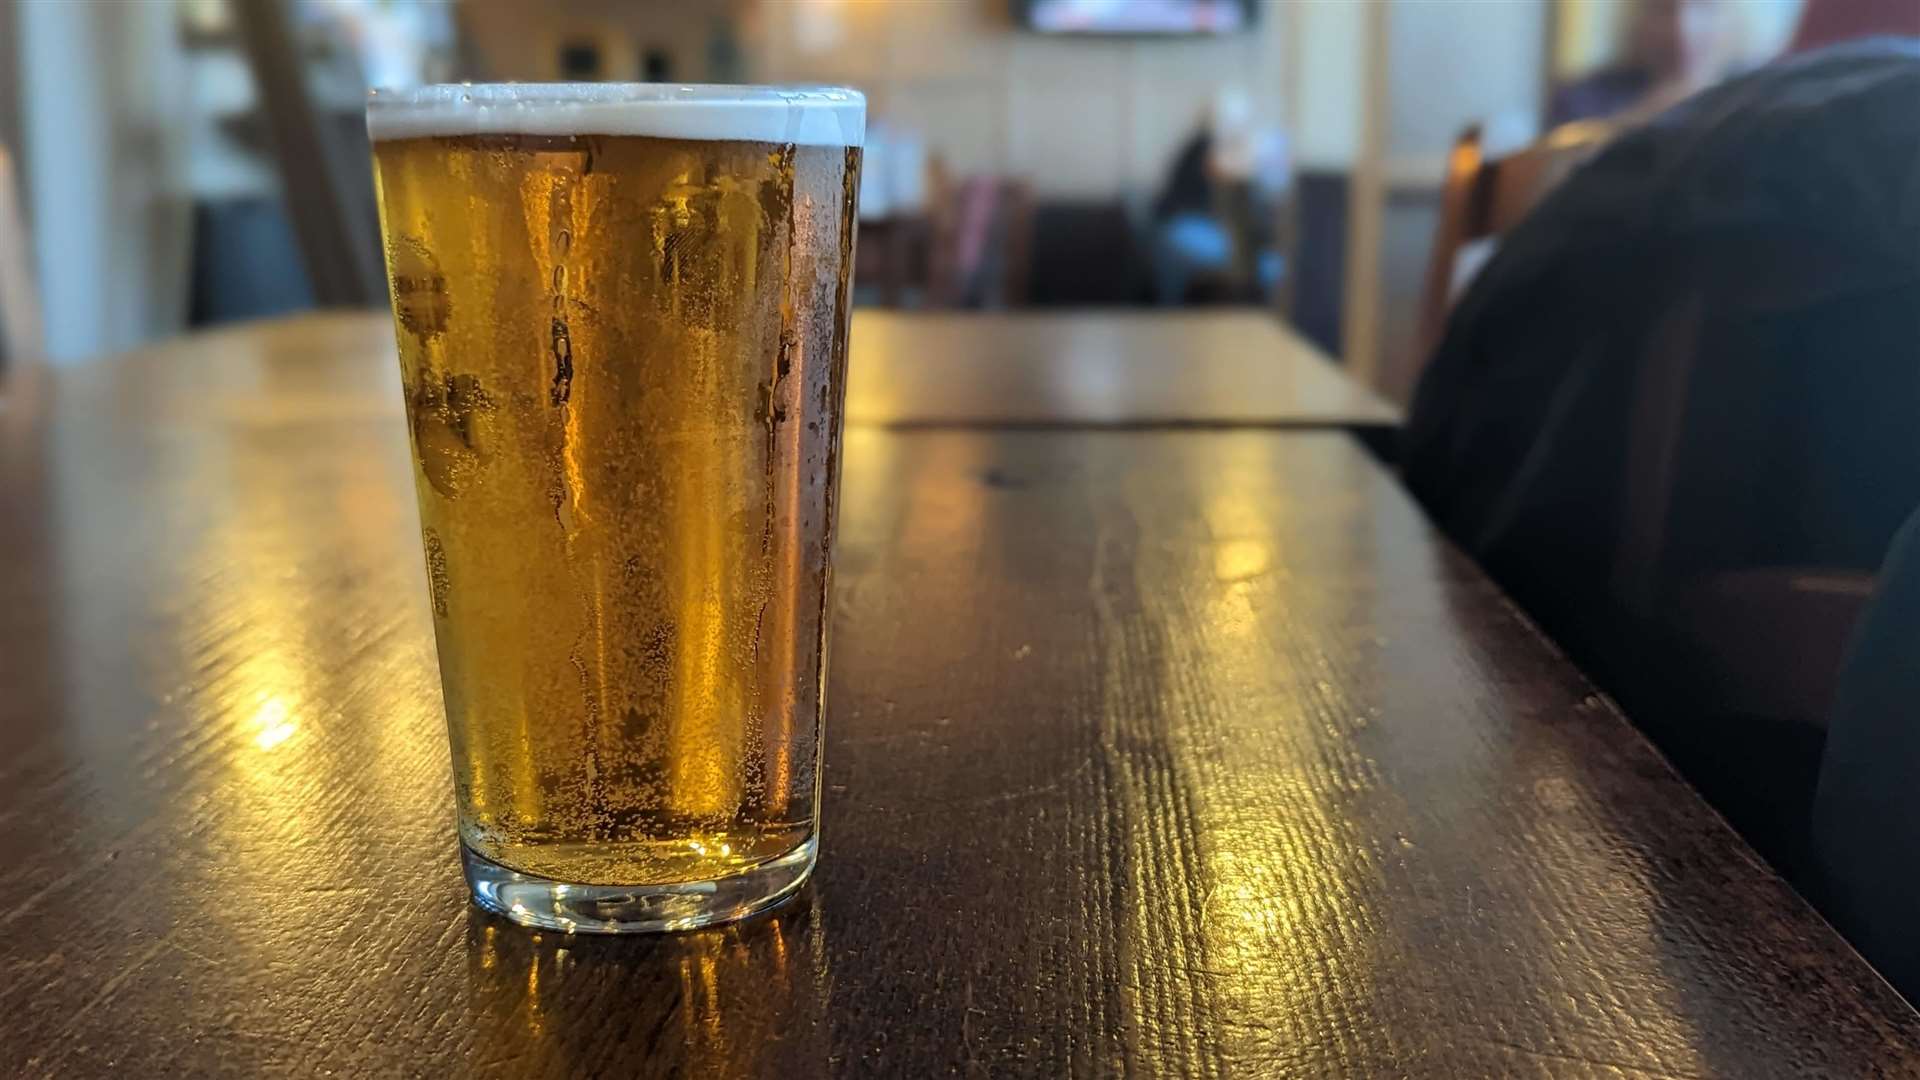 Treat yourself to a pint in the Wetherspoon January sale. Picture: Rhys Griffiths